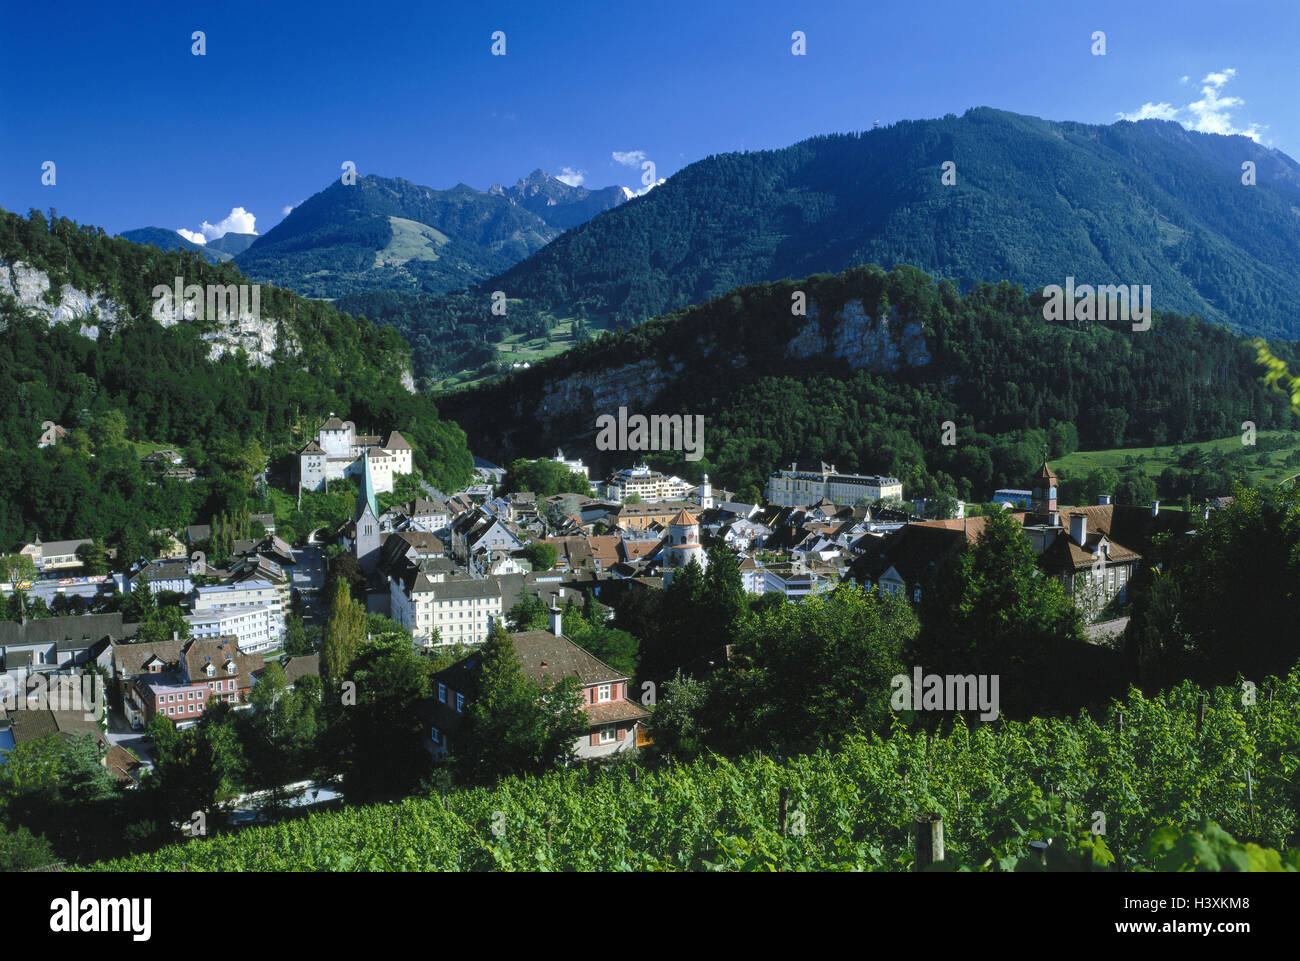 Austria, Vorarlberg, Feldkirch, local view, summer, Europe, mountain Arl, tourist resort, local overview, mountain landscape, valley, houses, residential houses, shadow castle, place of interest, culture, outside Stock Photo